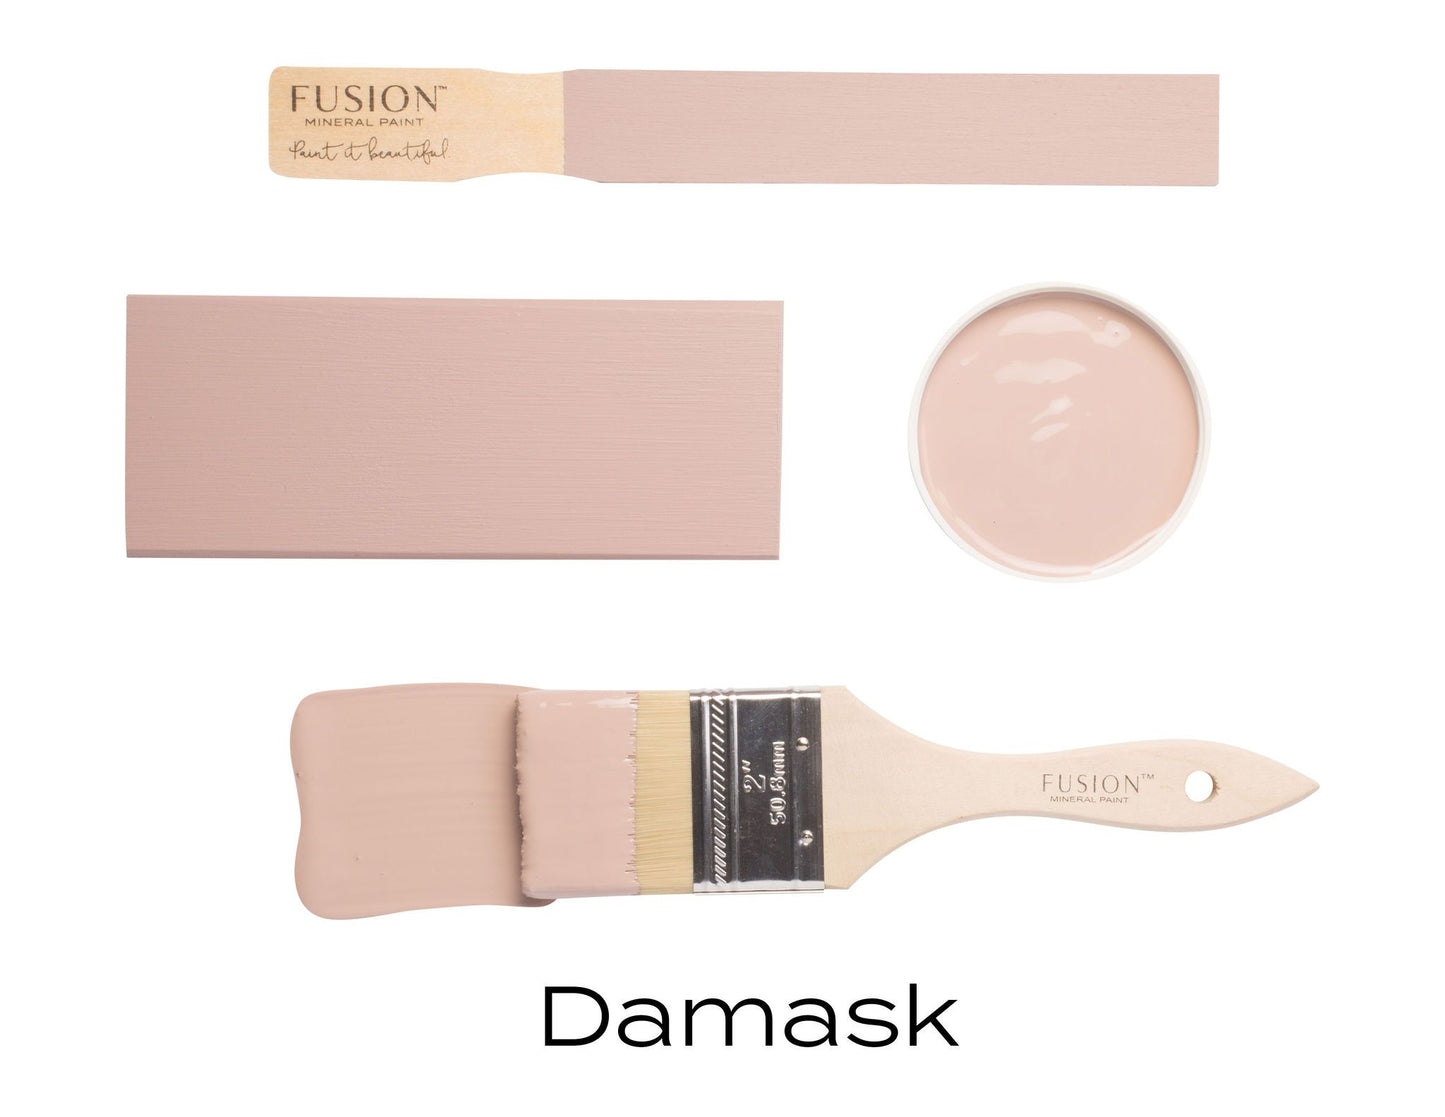 DAMASK - Fusion Mineral Paint - 37ml, 500ml